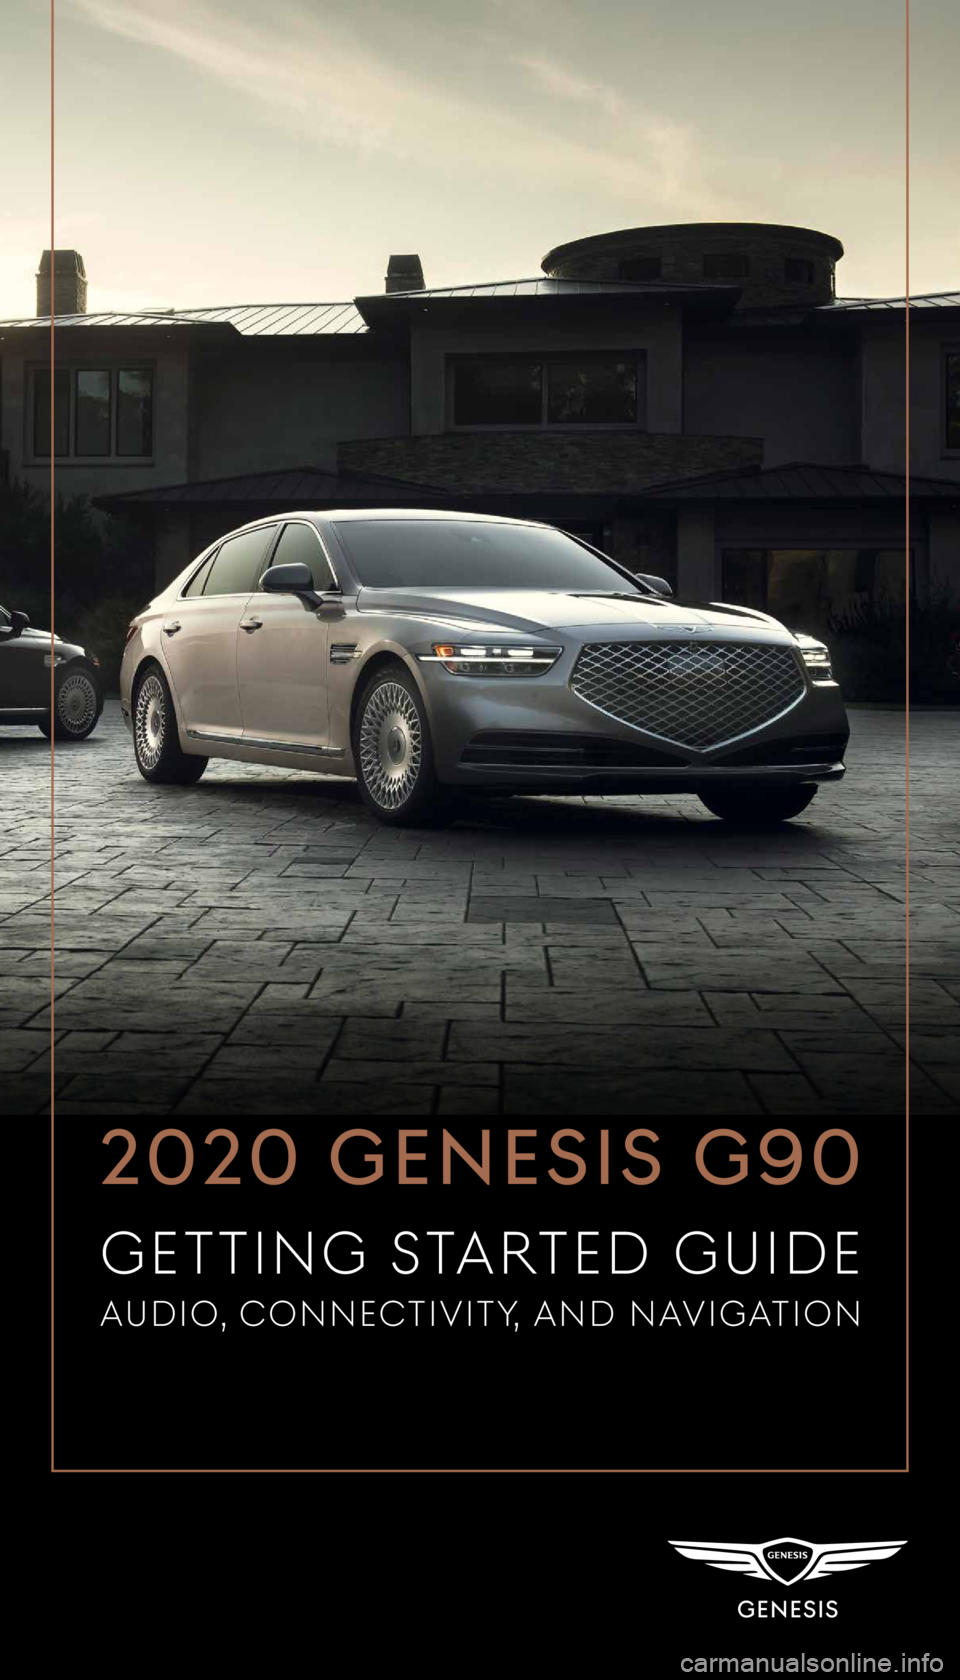 GENESIS G90 2020  Getting Started Guide  
2020 GENESIS G90
GETTING S
AUDIONNEVITY AND NAVIGON  